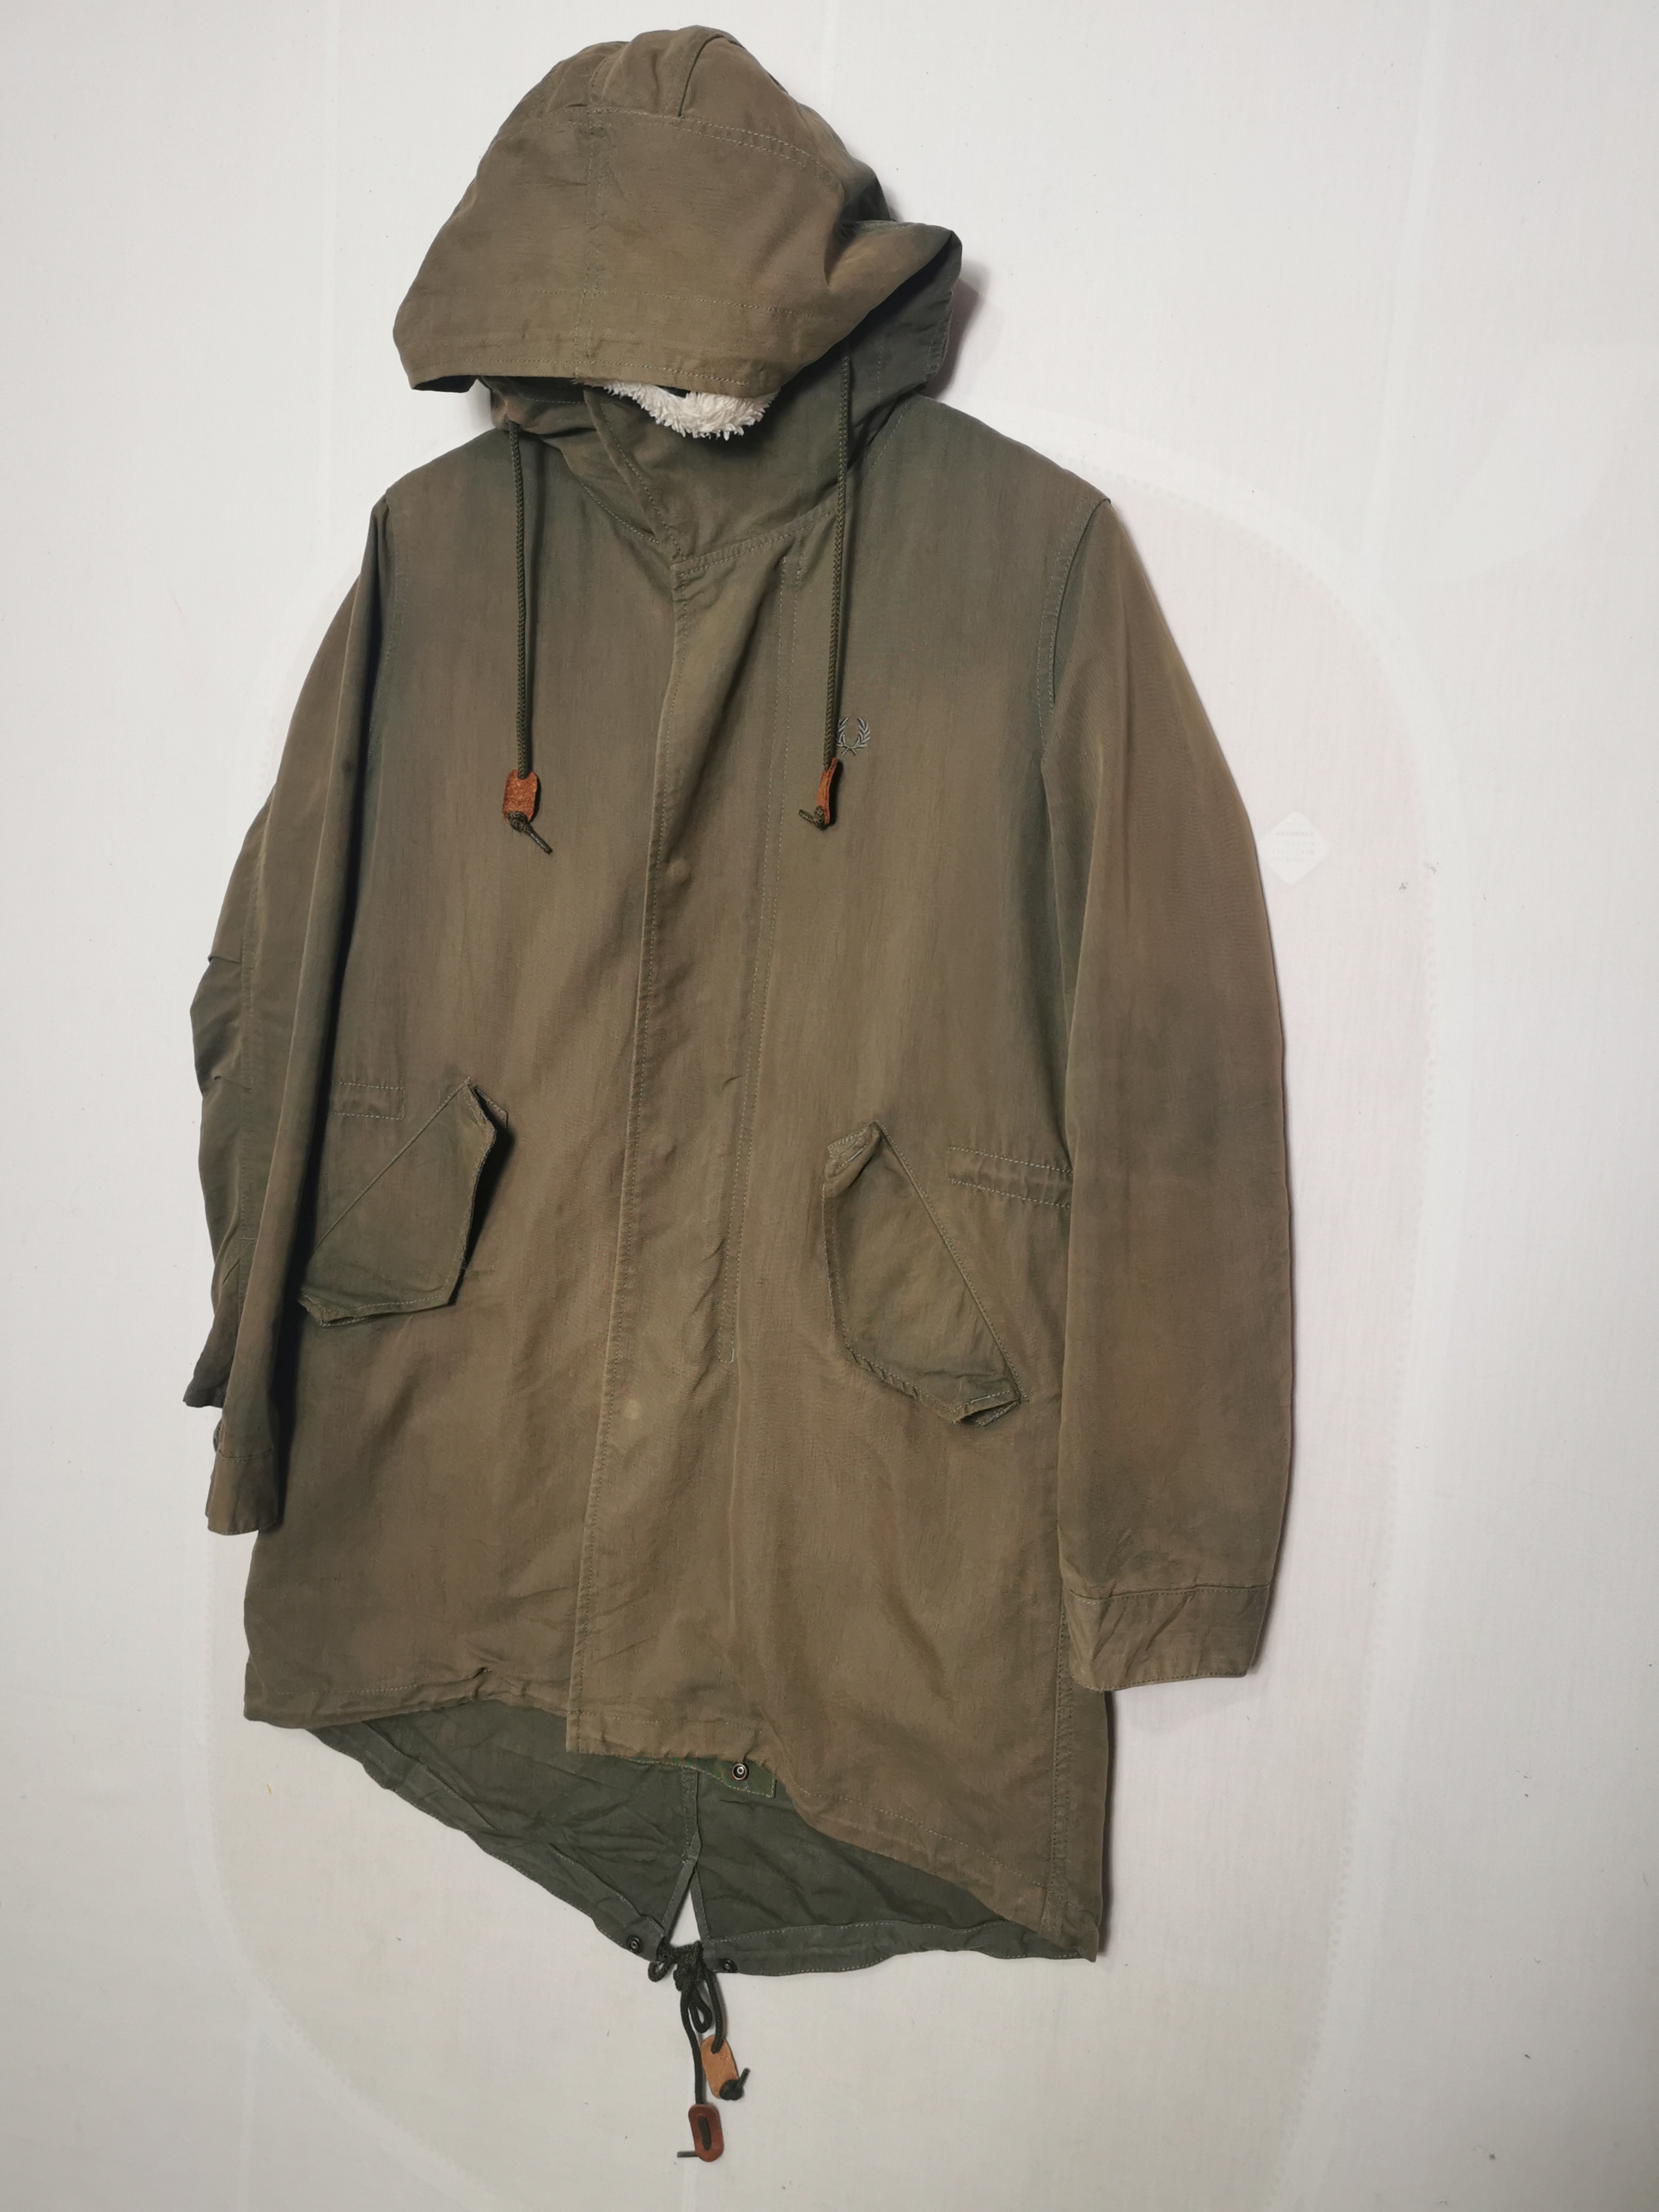 Fred Perry Fishtail Parka Jacket Great Britain Sherpa - 3